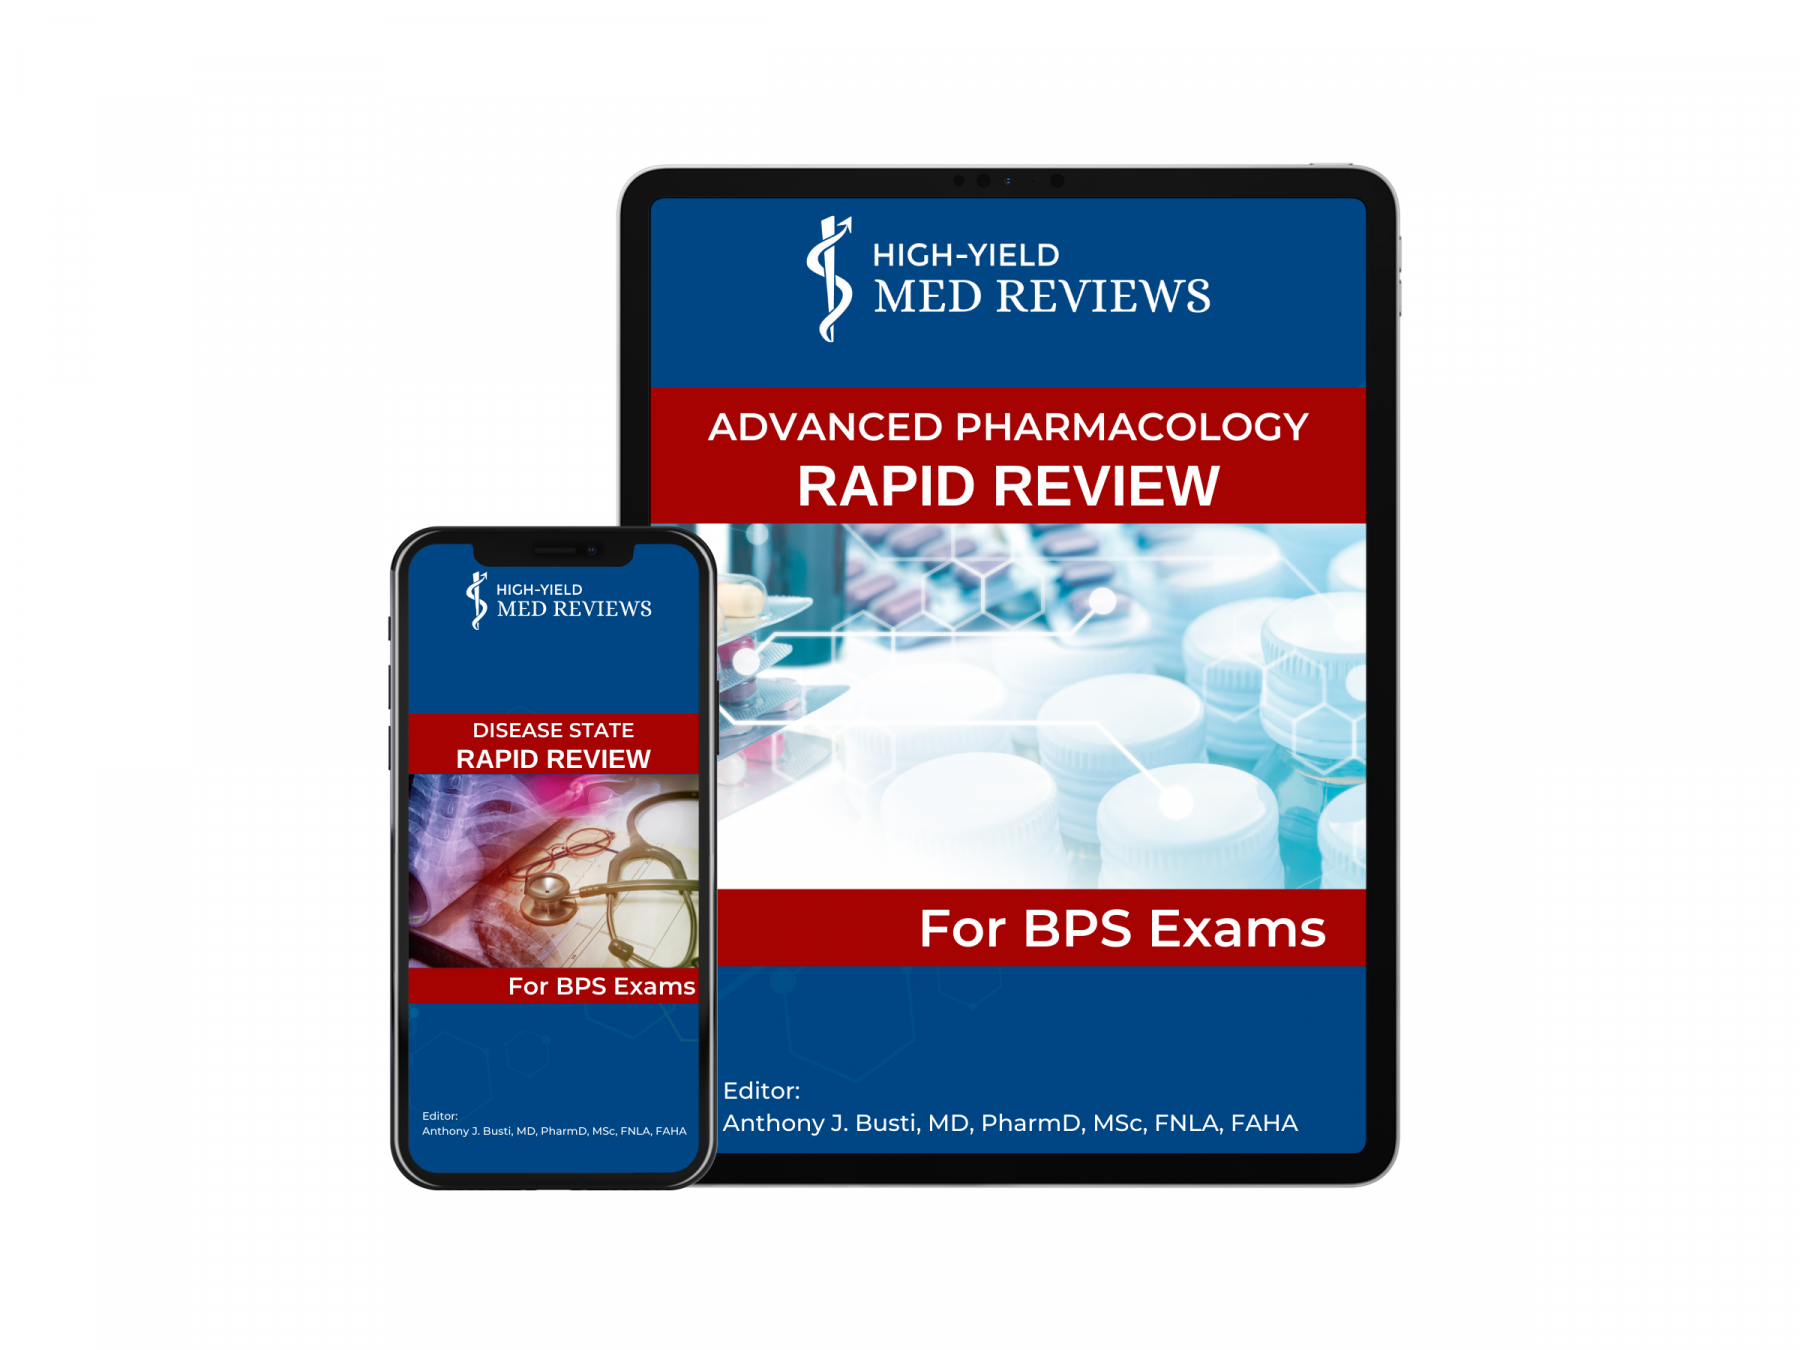 advanced pharmacology rapid review on tablet and phone